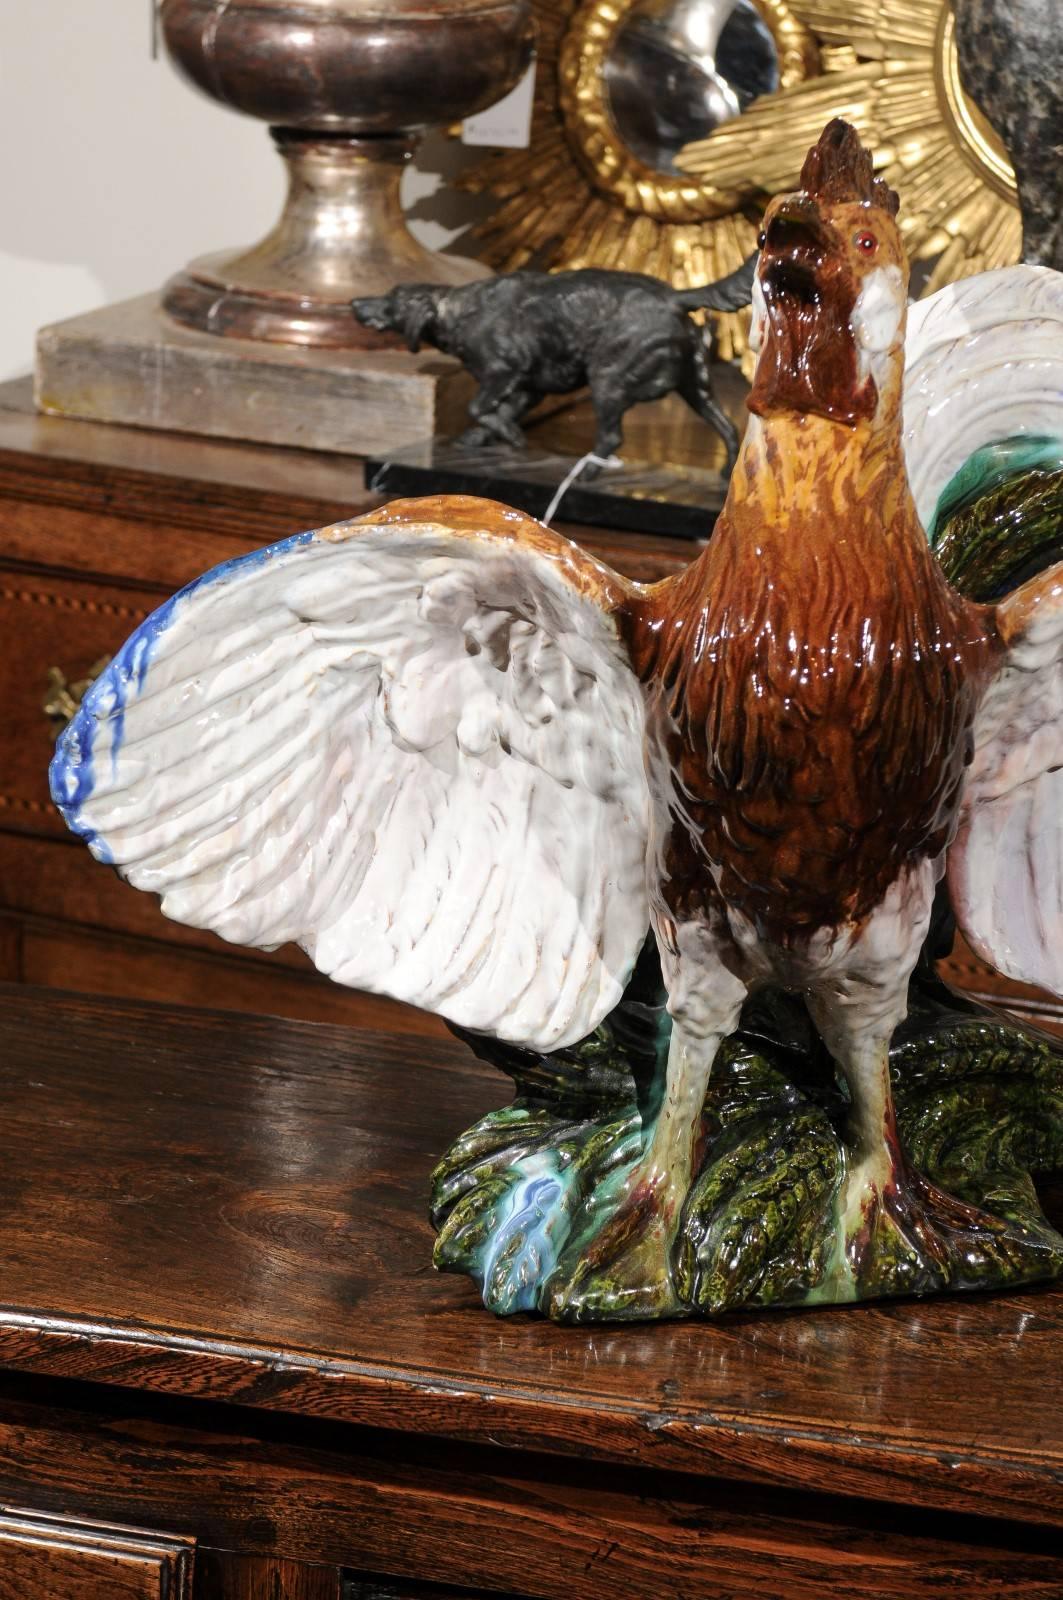 20th Century French Rooster Majolica Sculpture from the Turn of the Century